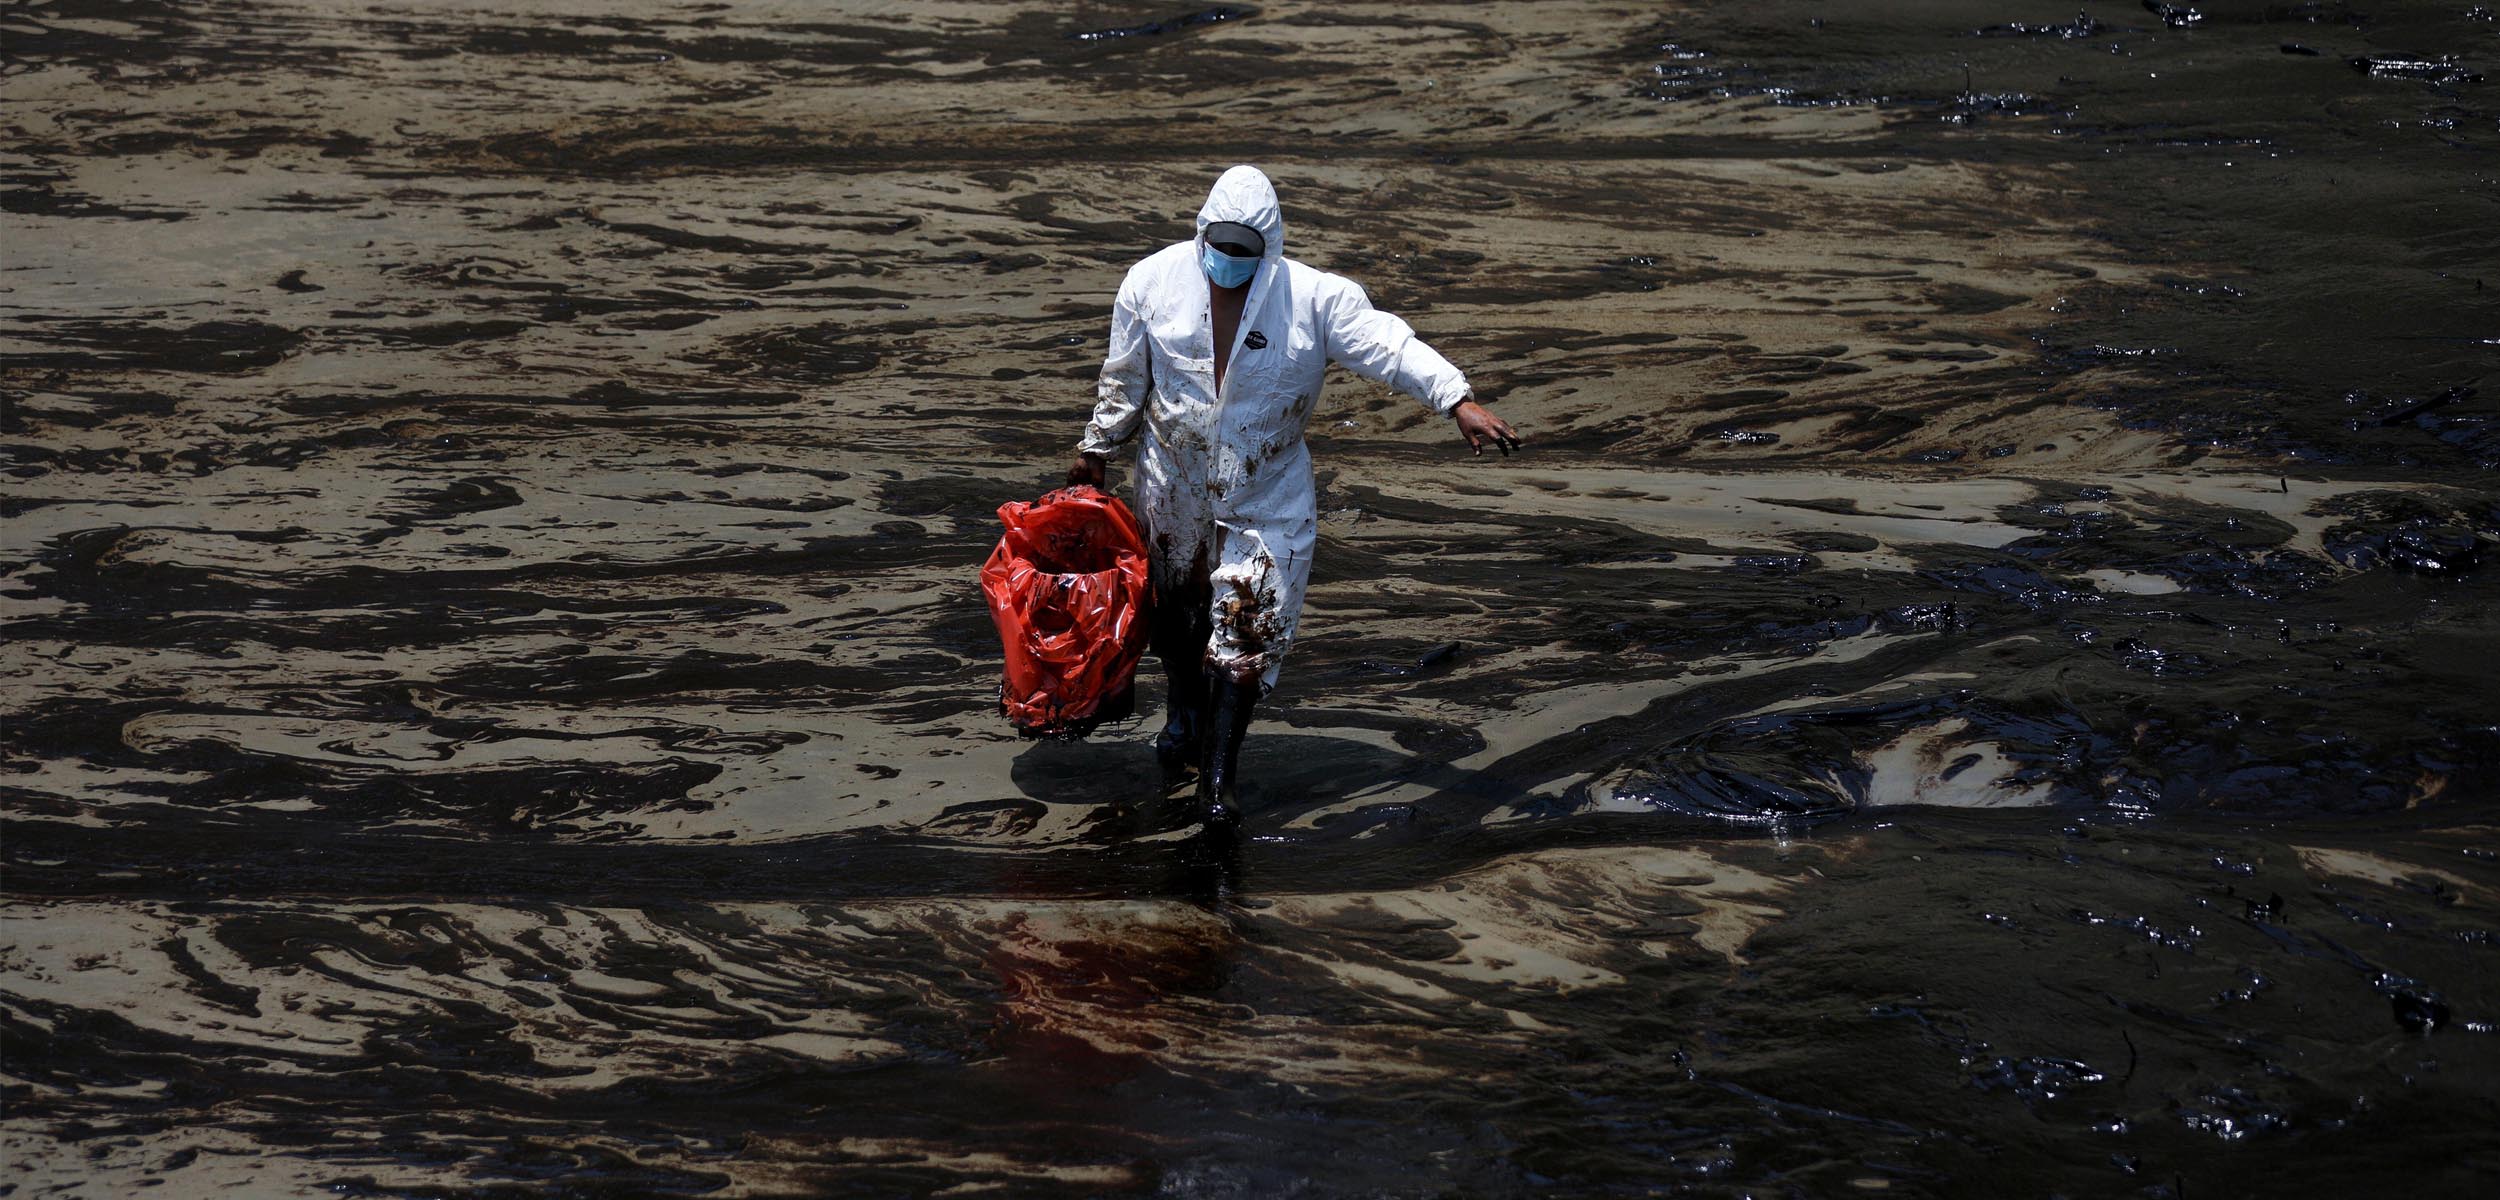 A cleanup worker dressed in a white hazmat suit walks through a black oil covered landscape alone.